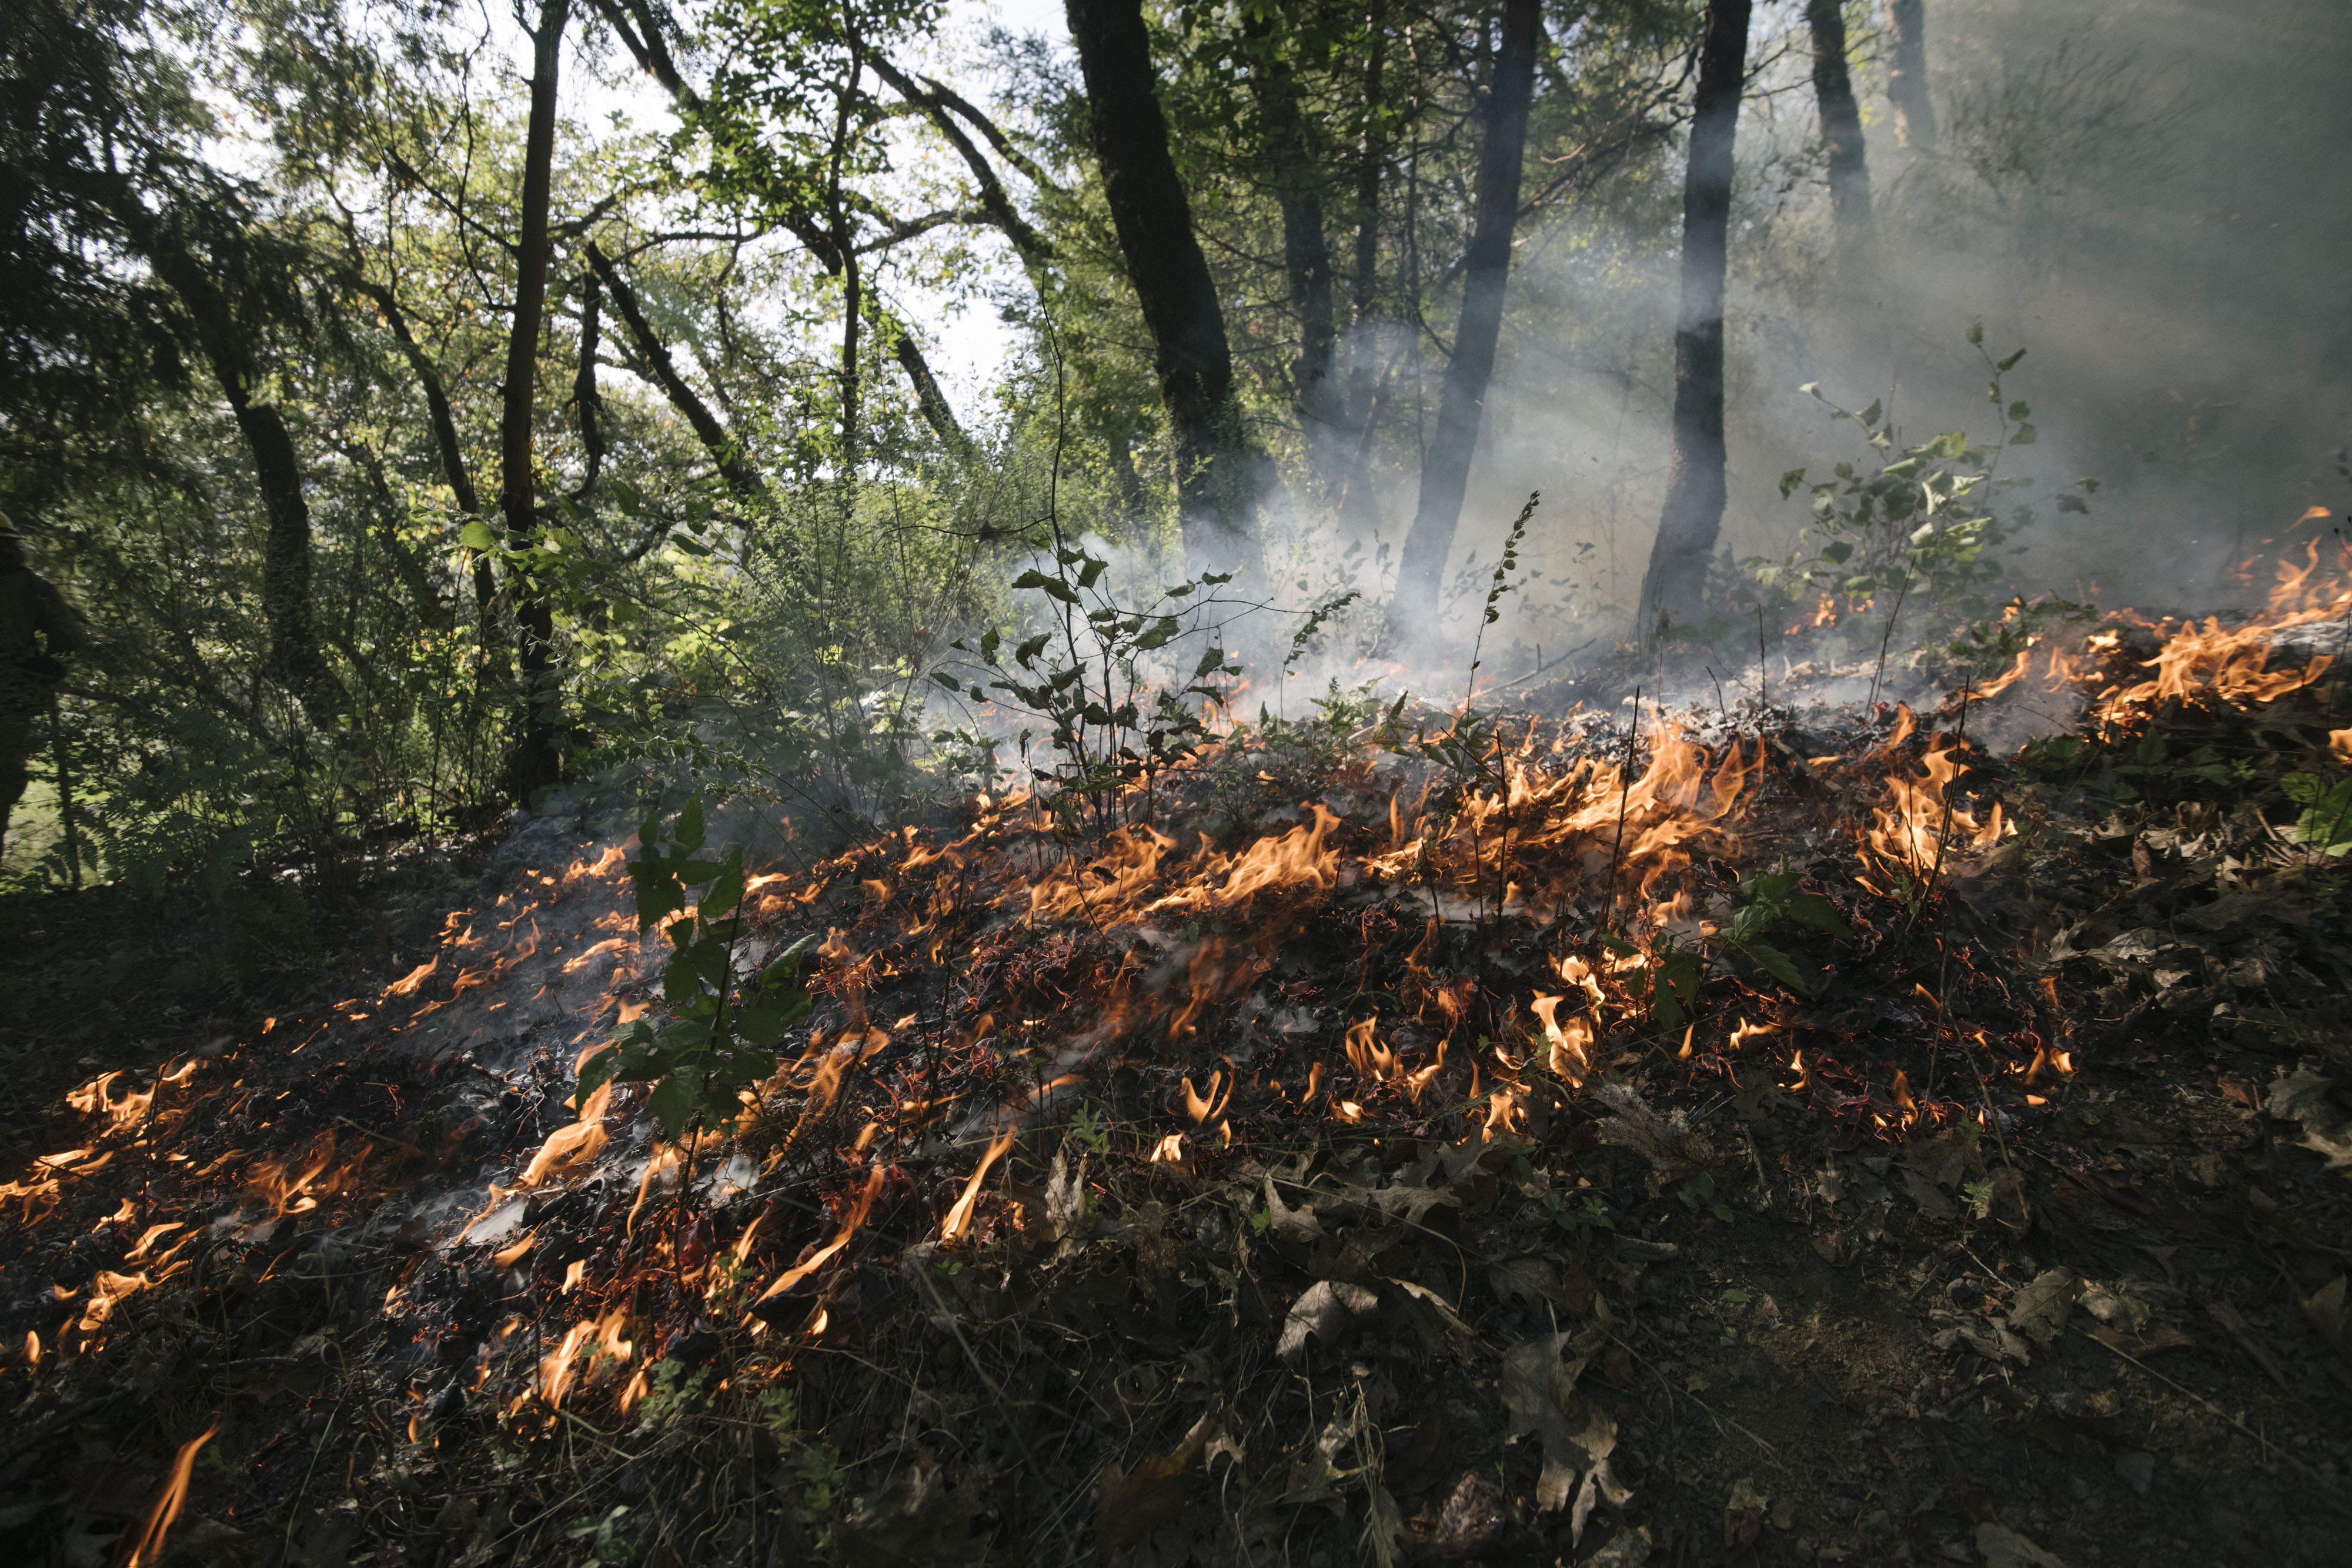 A controlled fire burns along a forest floor in a circle around a young hazel plant to keep it safe and remove competitors.